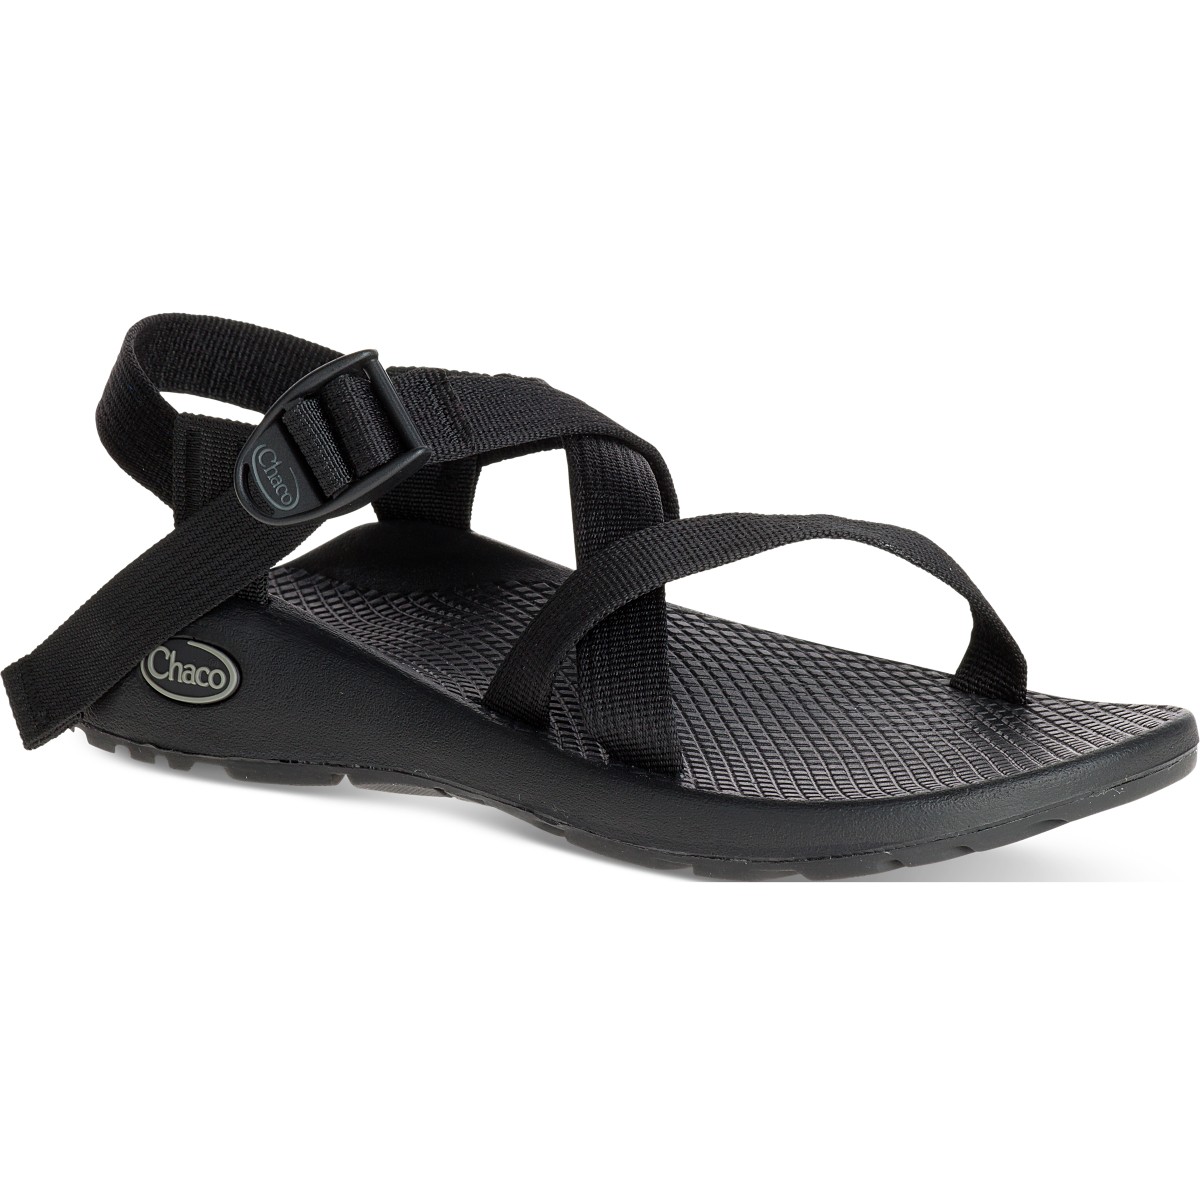 Chaco Women's Z1 Classic Sandals JCH109048